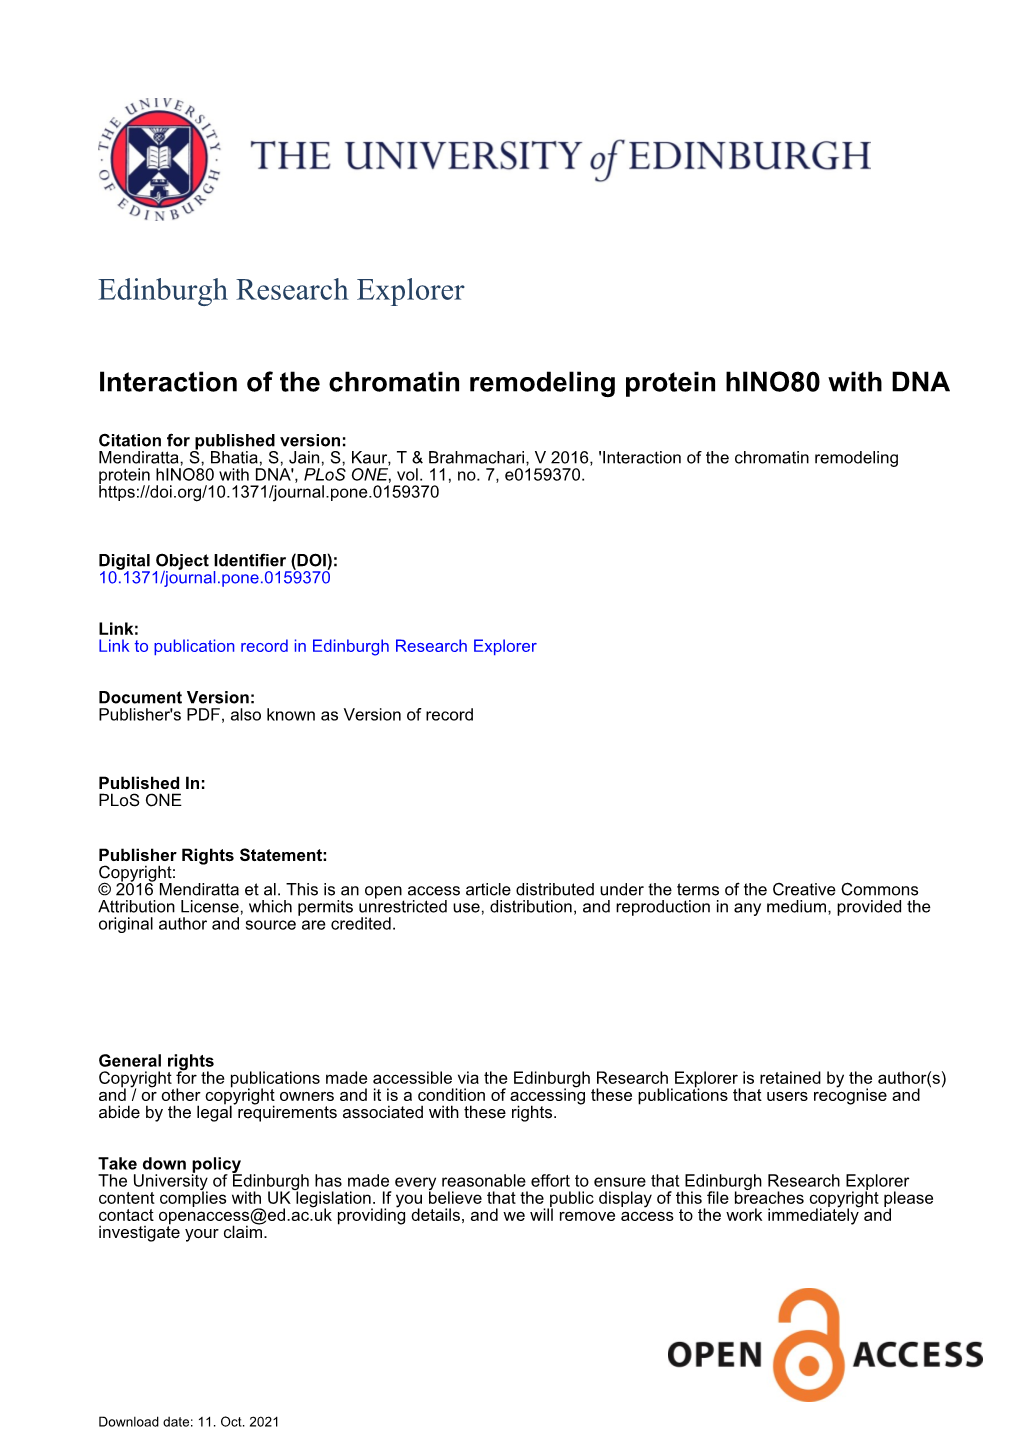 Interaction of the Chromatin Remodeling Protein Hino80 with DNA